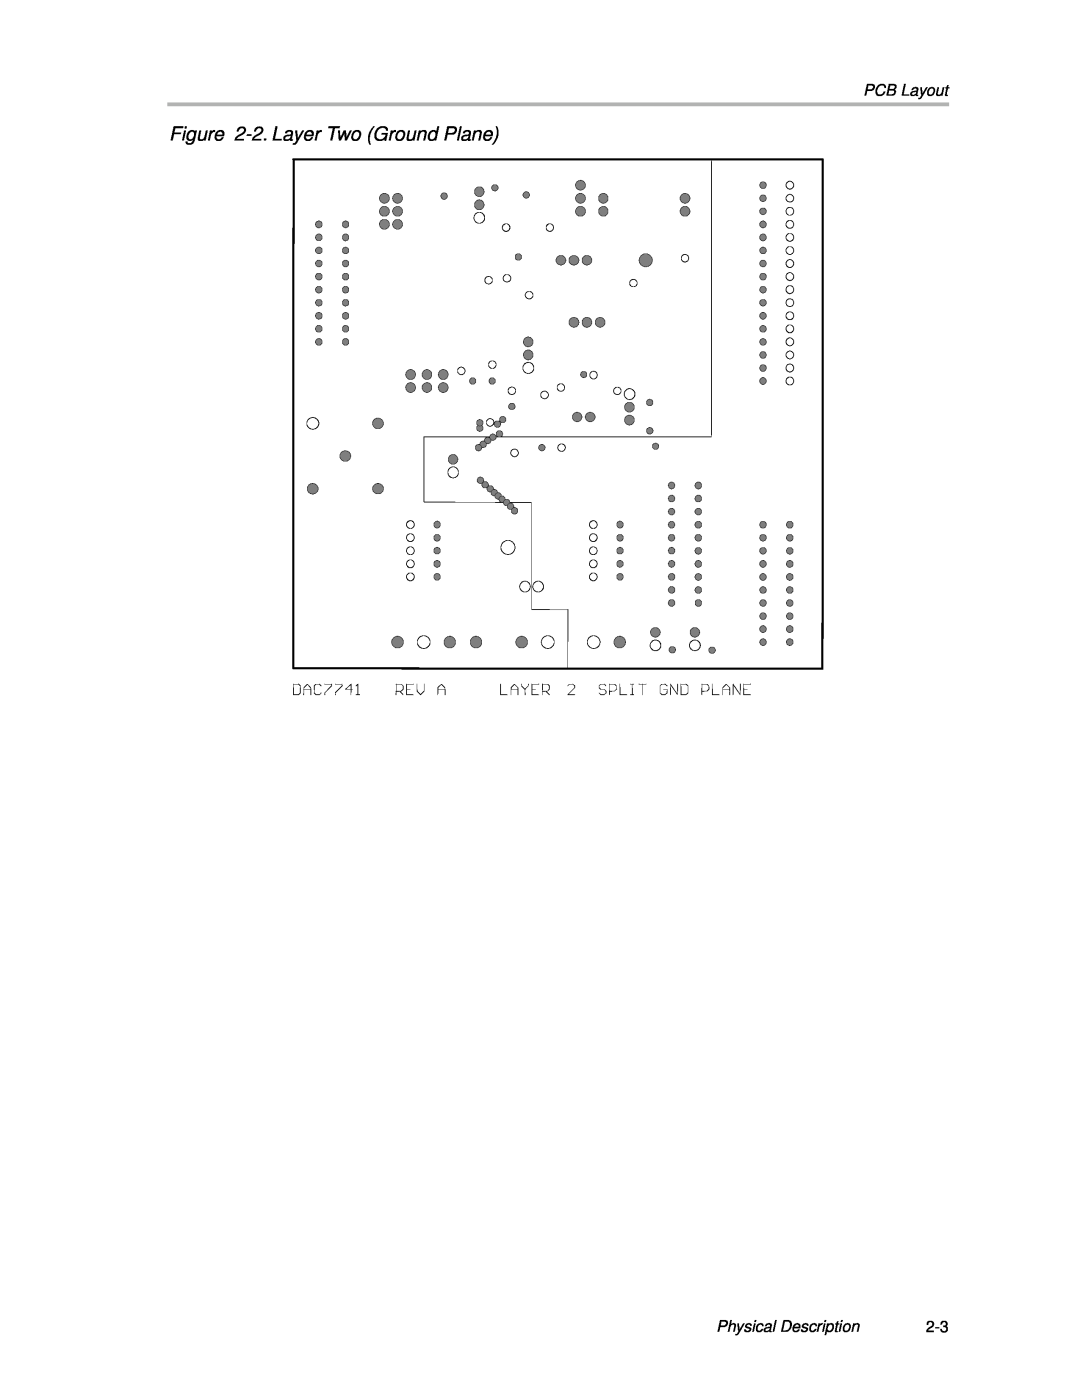 Texas Instruments DAC7741EVM manual 2. Layer Two Ground Plane, PCB Layout, Physical Description 